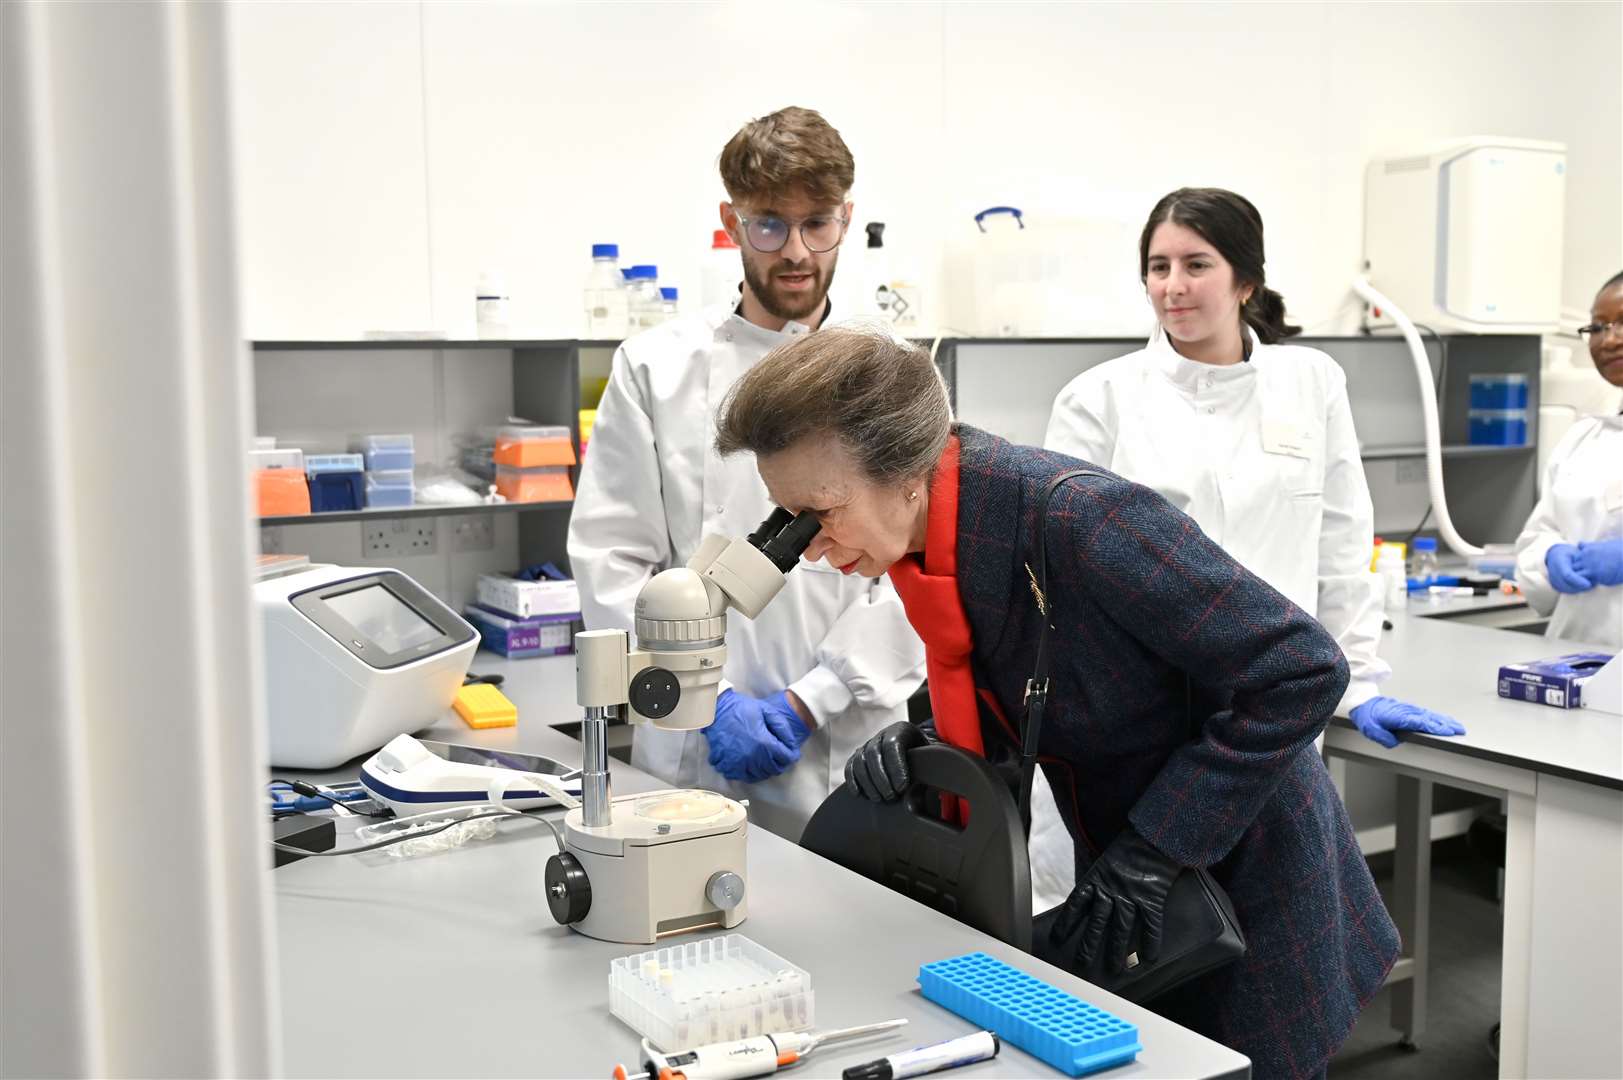 Princess Anne takes a look down a microscope during a tour of the new Rural and Veterinary Innovation Centre.